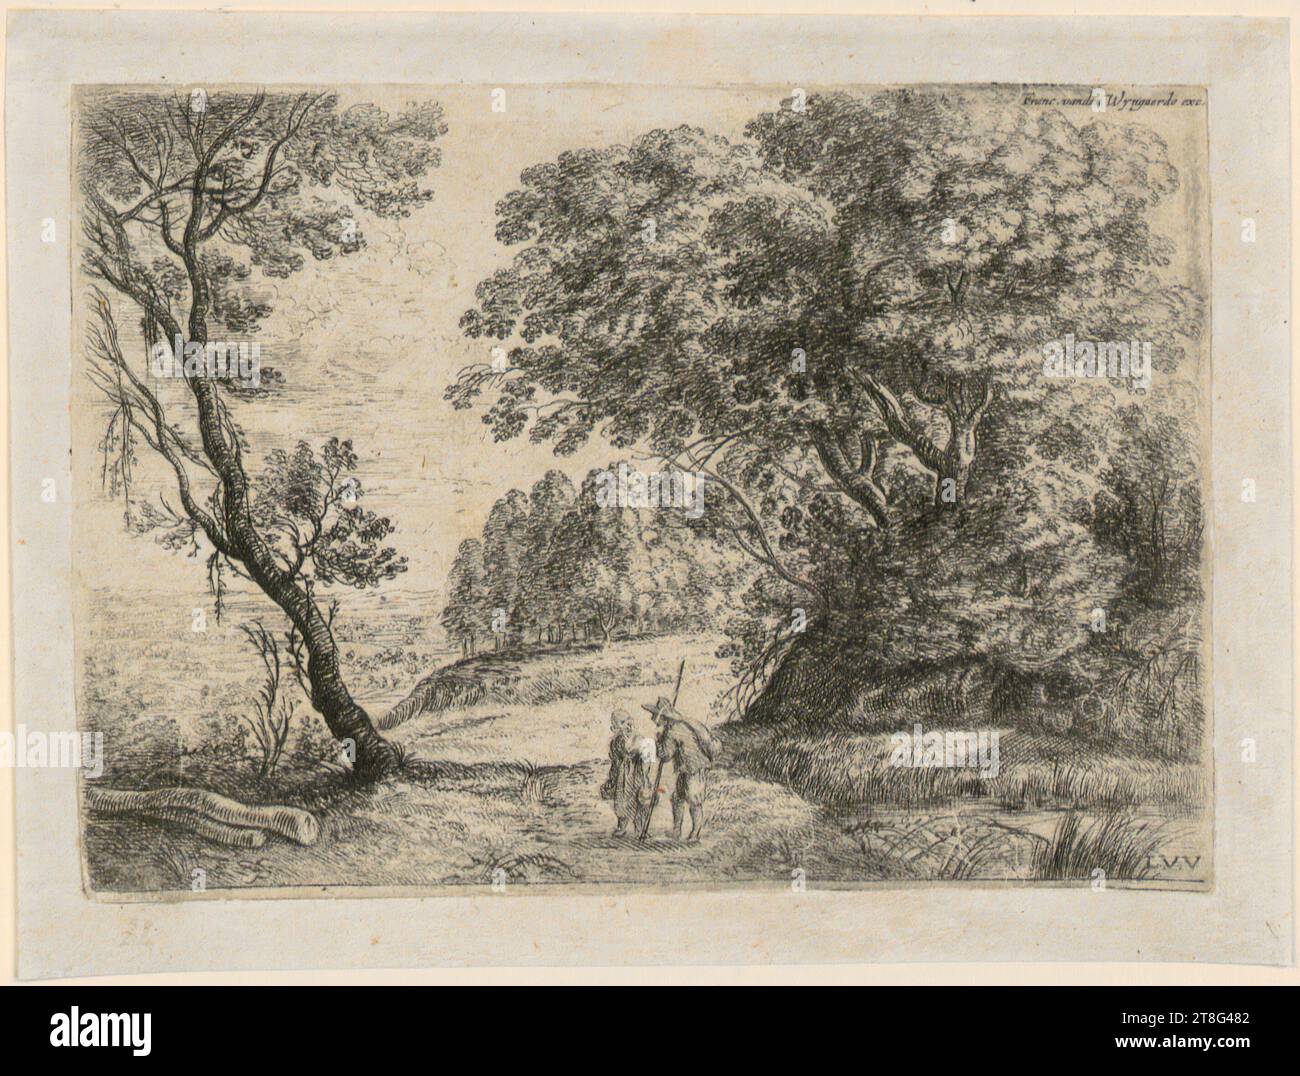 Lucas van Uden (1595 - 1672), Landscape with a farmer and a farmer's wife in conversation, sheet 2 of the set 'Six Landscapes', print medium: 1610 - 1672, etching and copperplate engraving, sheet size: 9.3 x 13.5 cm platemark: 9.4 x 13.1 cm, inscribed upper right 'Franc. vanden Wyngaerde exc.'; monogrammed lower right 'L.V.V Stock Photo